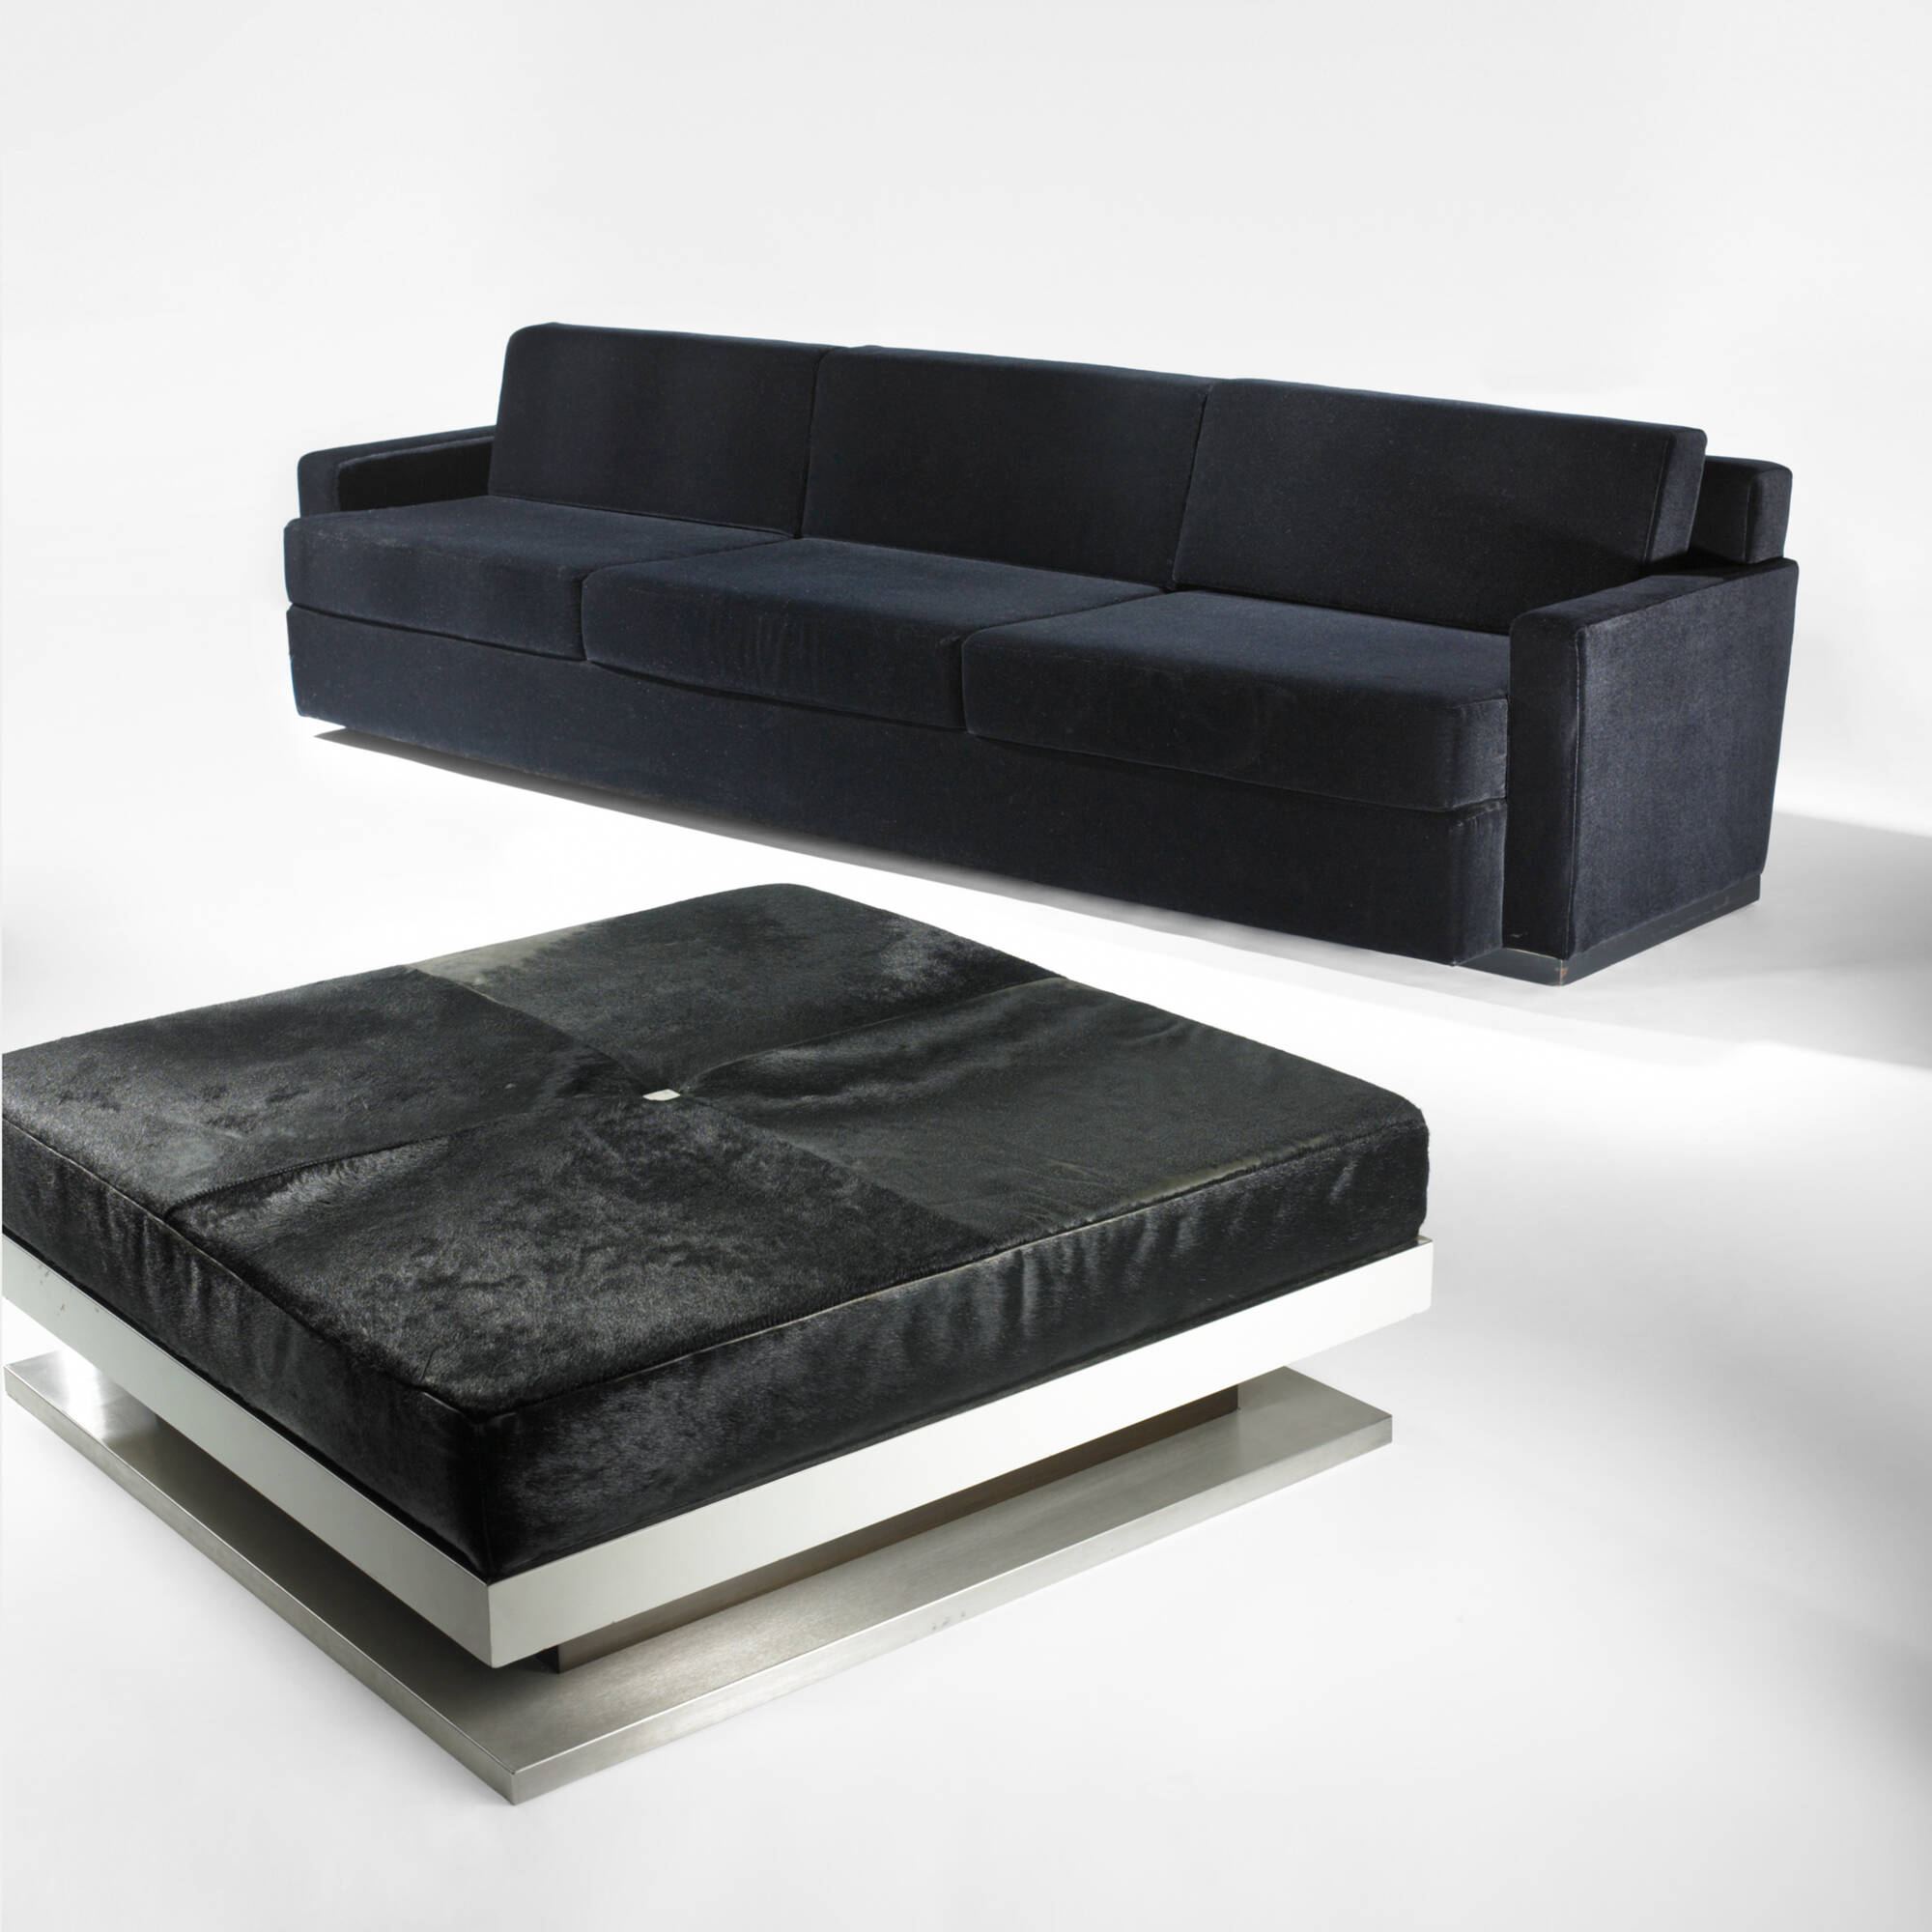 232: TOM FORD AND WILLIAM SOFIELD, sofa and ottoman for Yves Saint Laurent  < Important Design, 8 December 2009 < Auctions | Wright: Auctions of Art  and Design